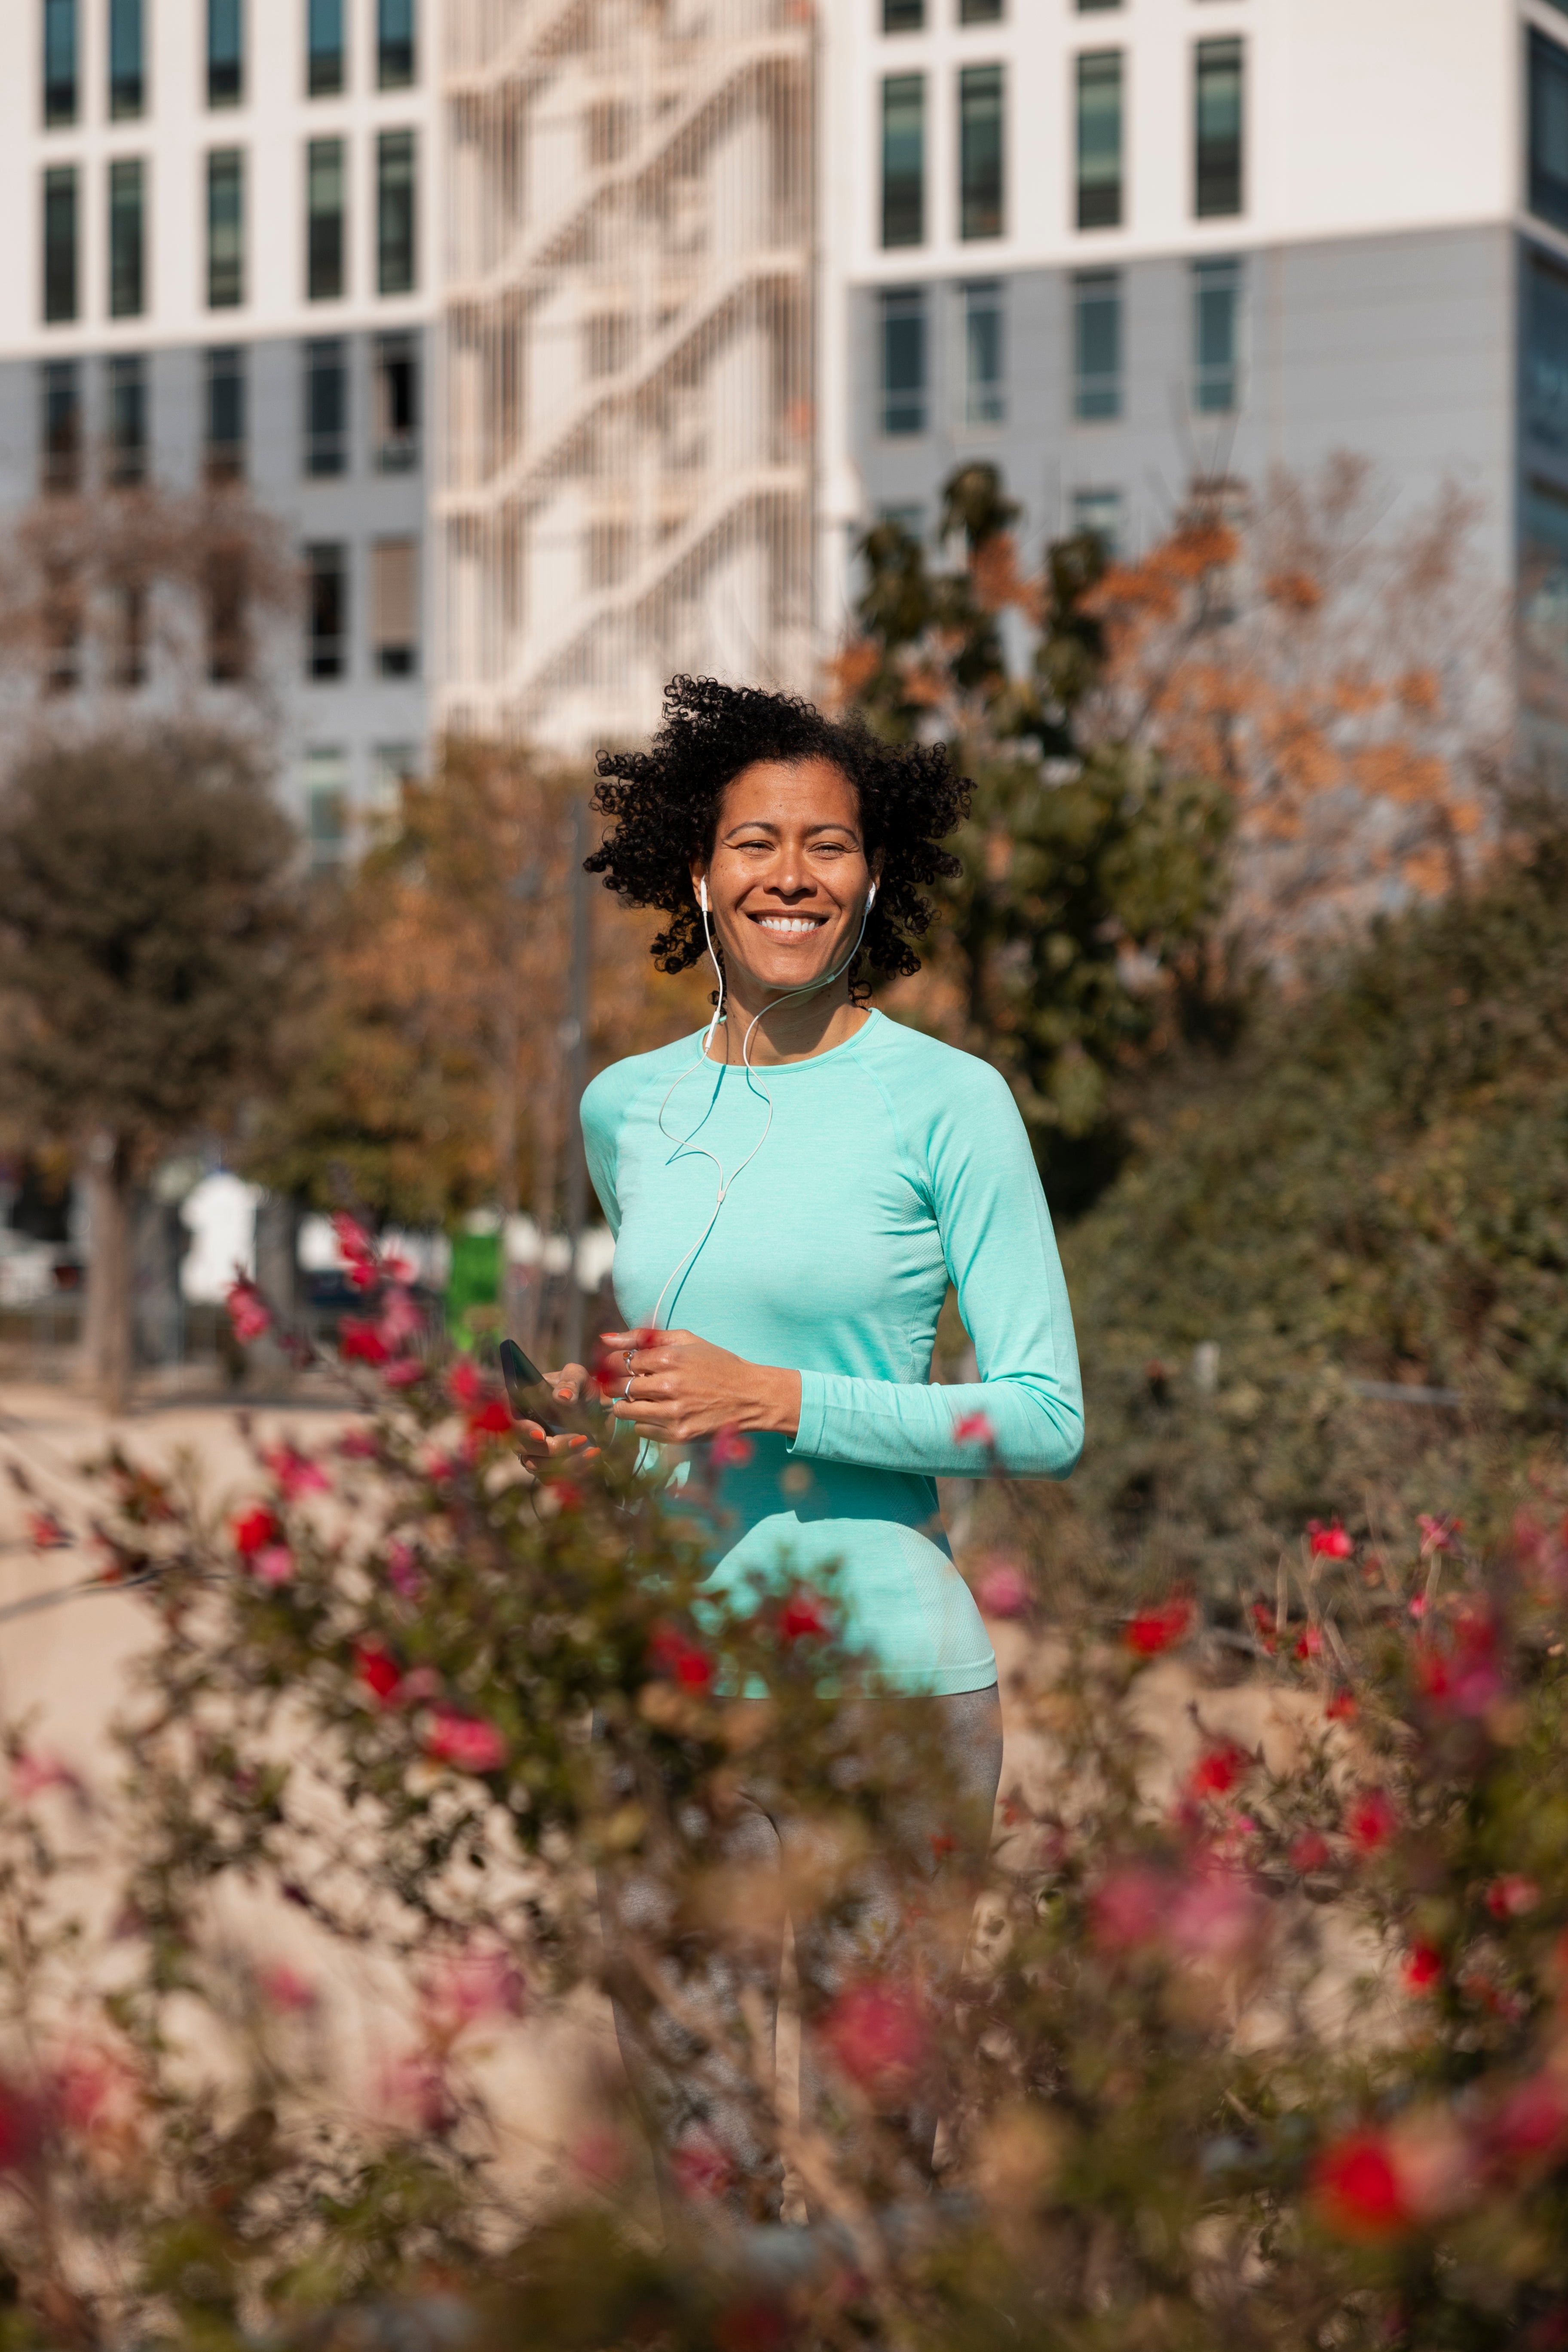 Smiling woman jogging with earphones in an urban park.